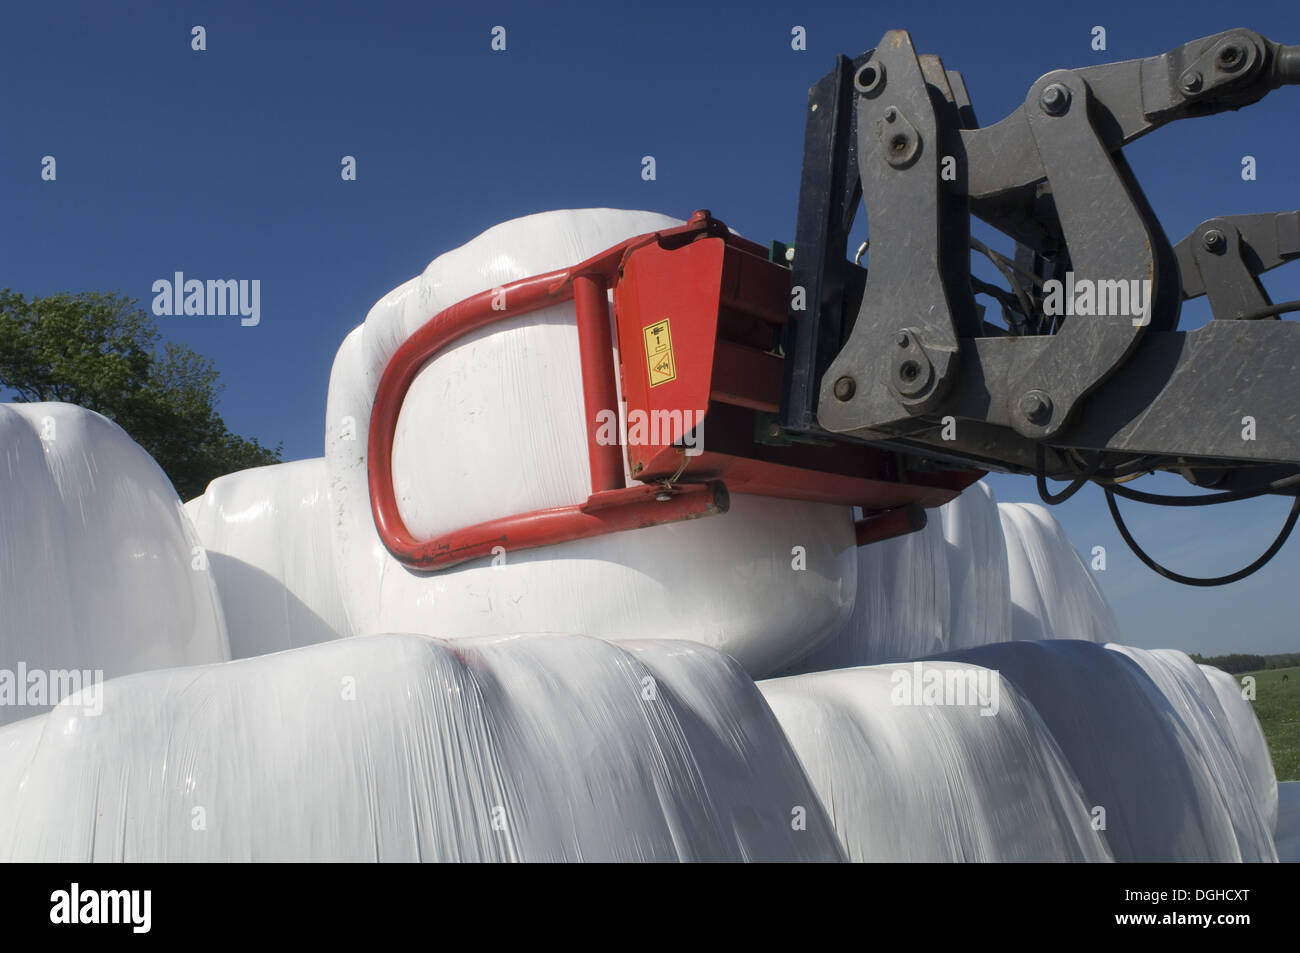 Plastic wrapped round silage bales, stacked onto pile with mechanical loader, Sweden Stock Photo